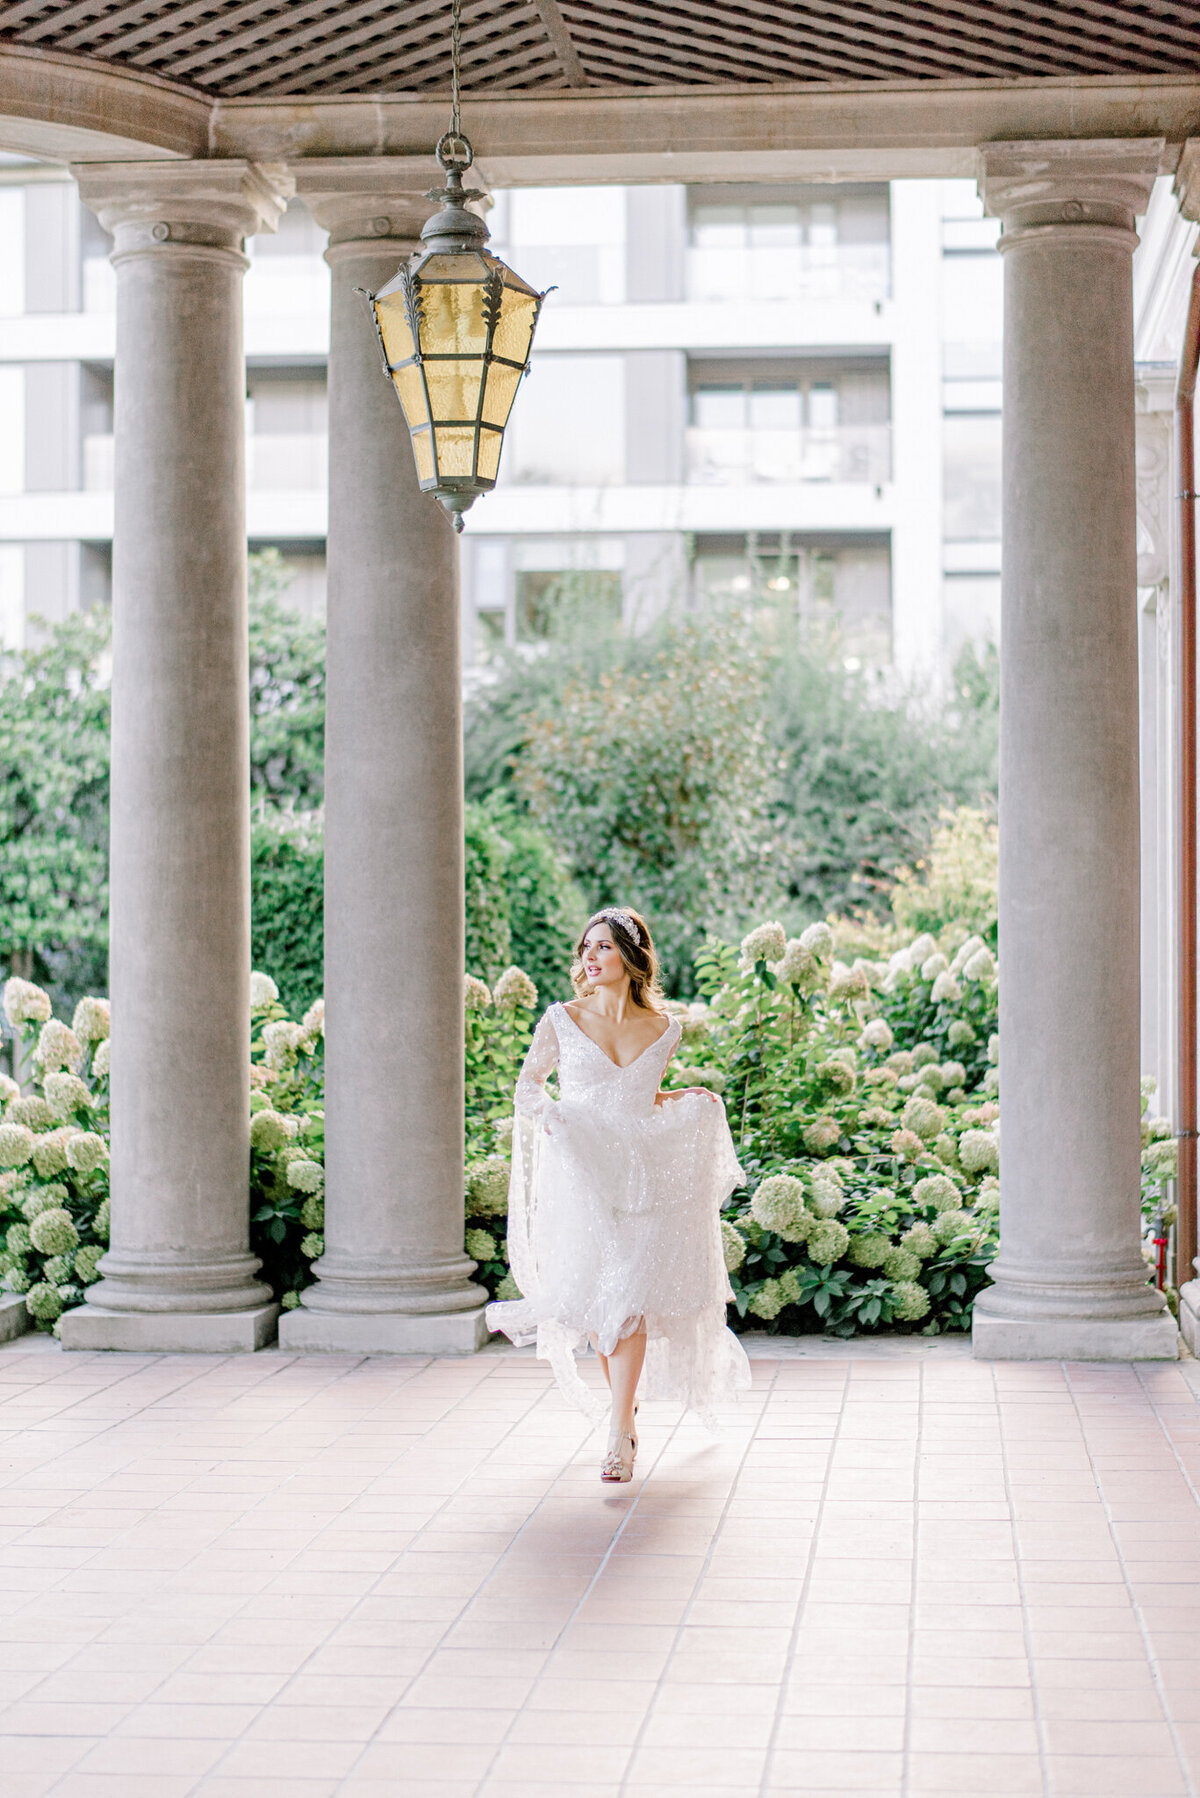 Elegant, romantic bridal inspirtaion, sequenced wedding gown, jewel encrusted headband, historic venue, captured by Julie Jagt Photography, fine art wedding photographer in Vancouver, BC. Featured on the Bronte Bride Vendor Guide.